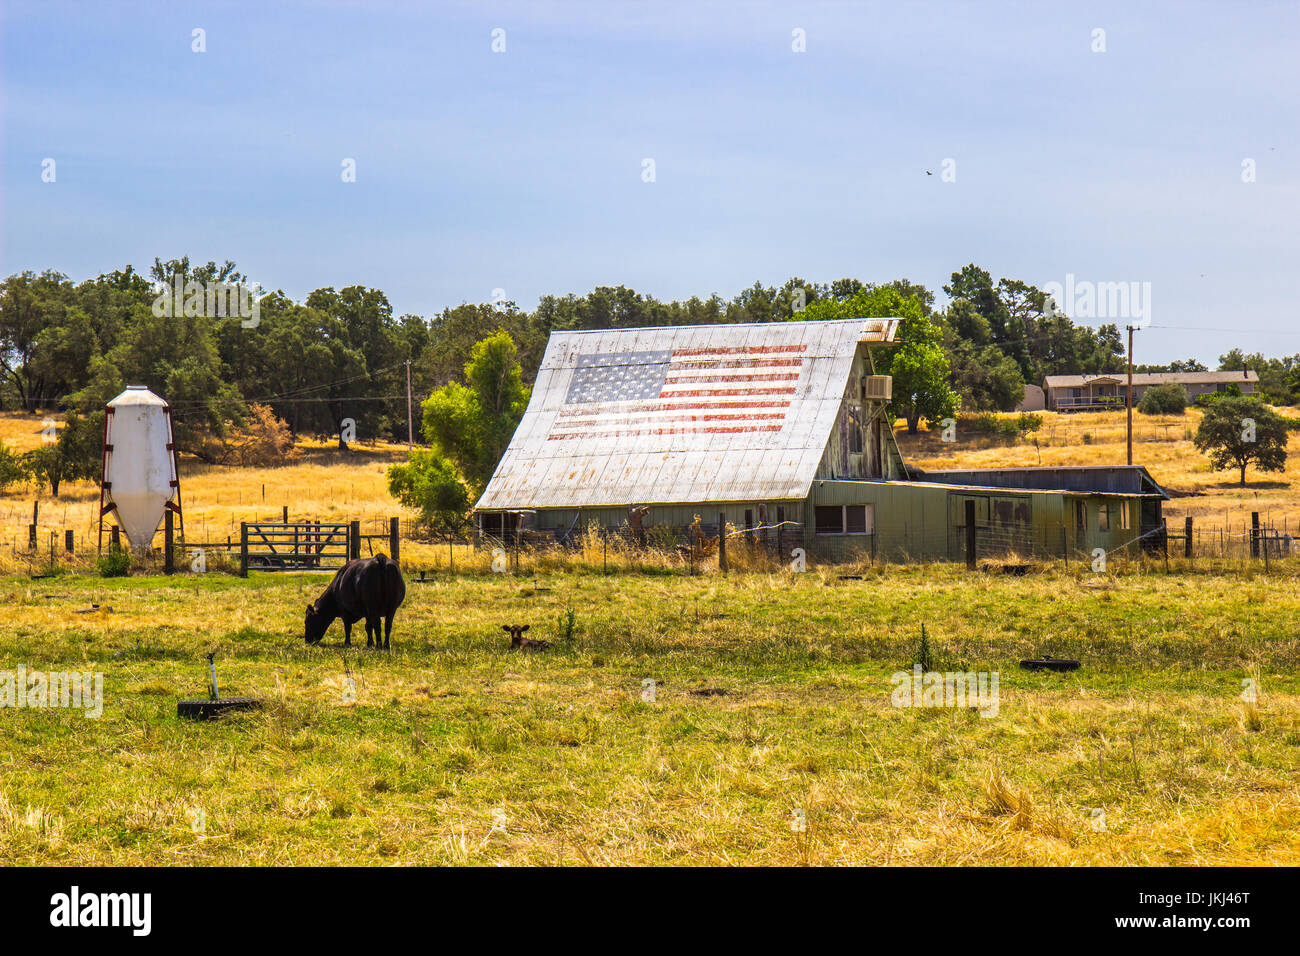 Ranch With Old Sheds & Barn With Faded American Flag On Tin Roof Stock Photo